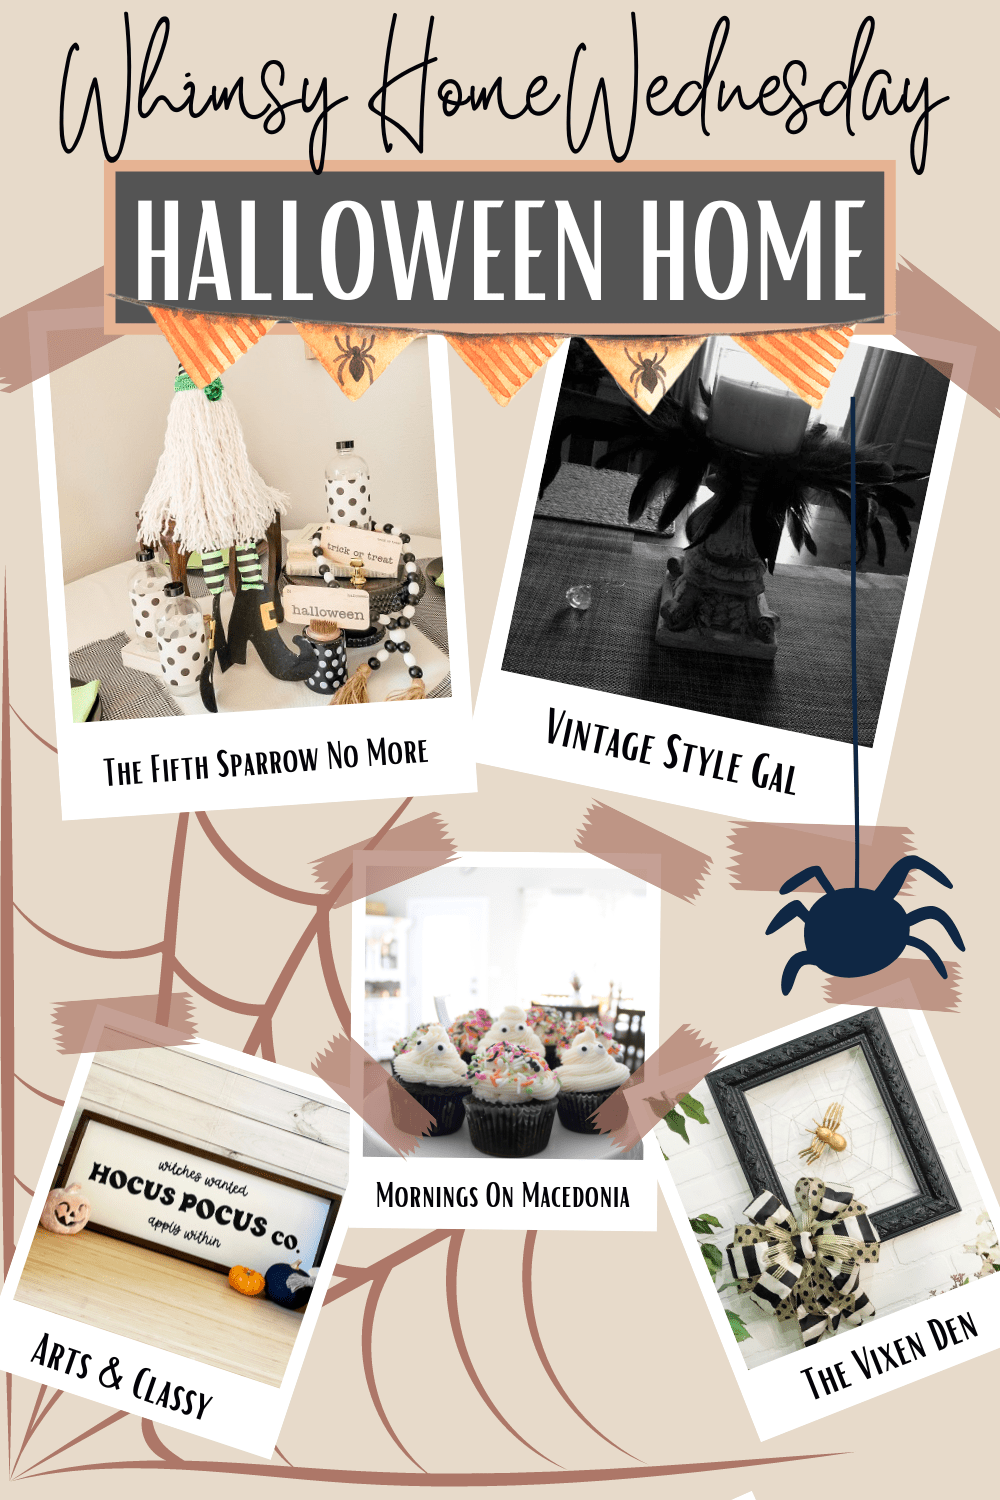 Whimsy Home Wednesday #1 – Whimsical Halloween Home